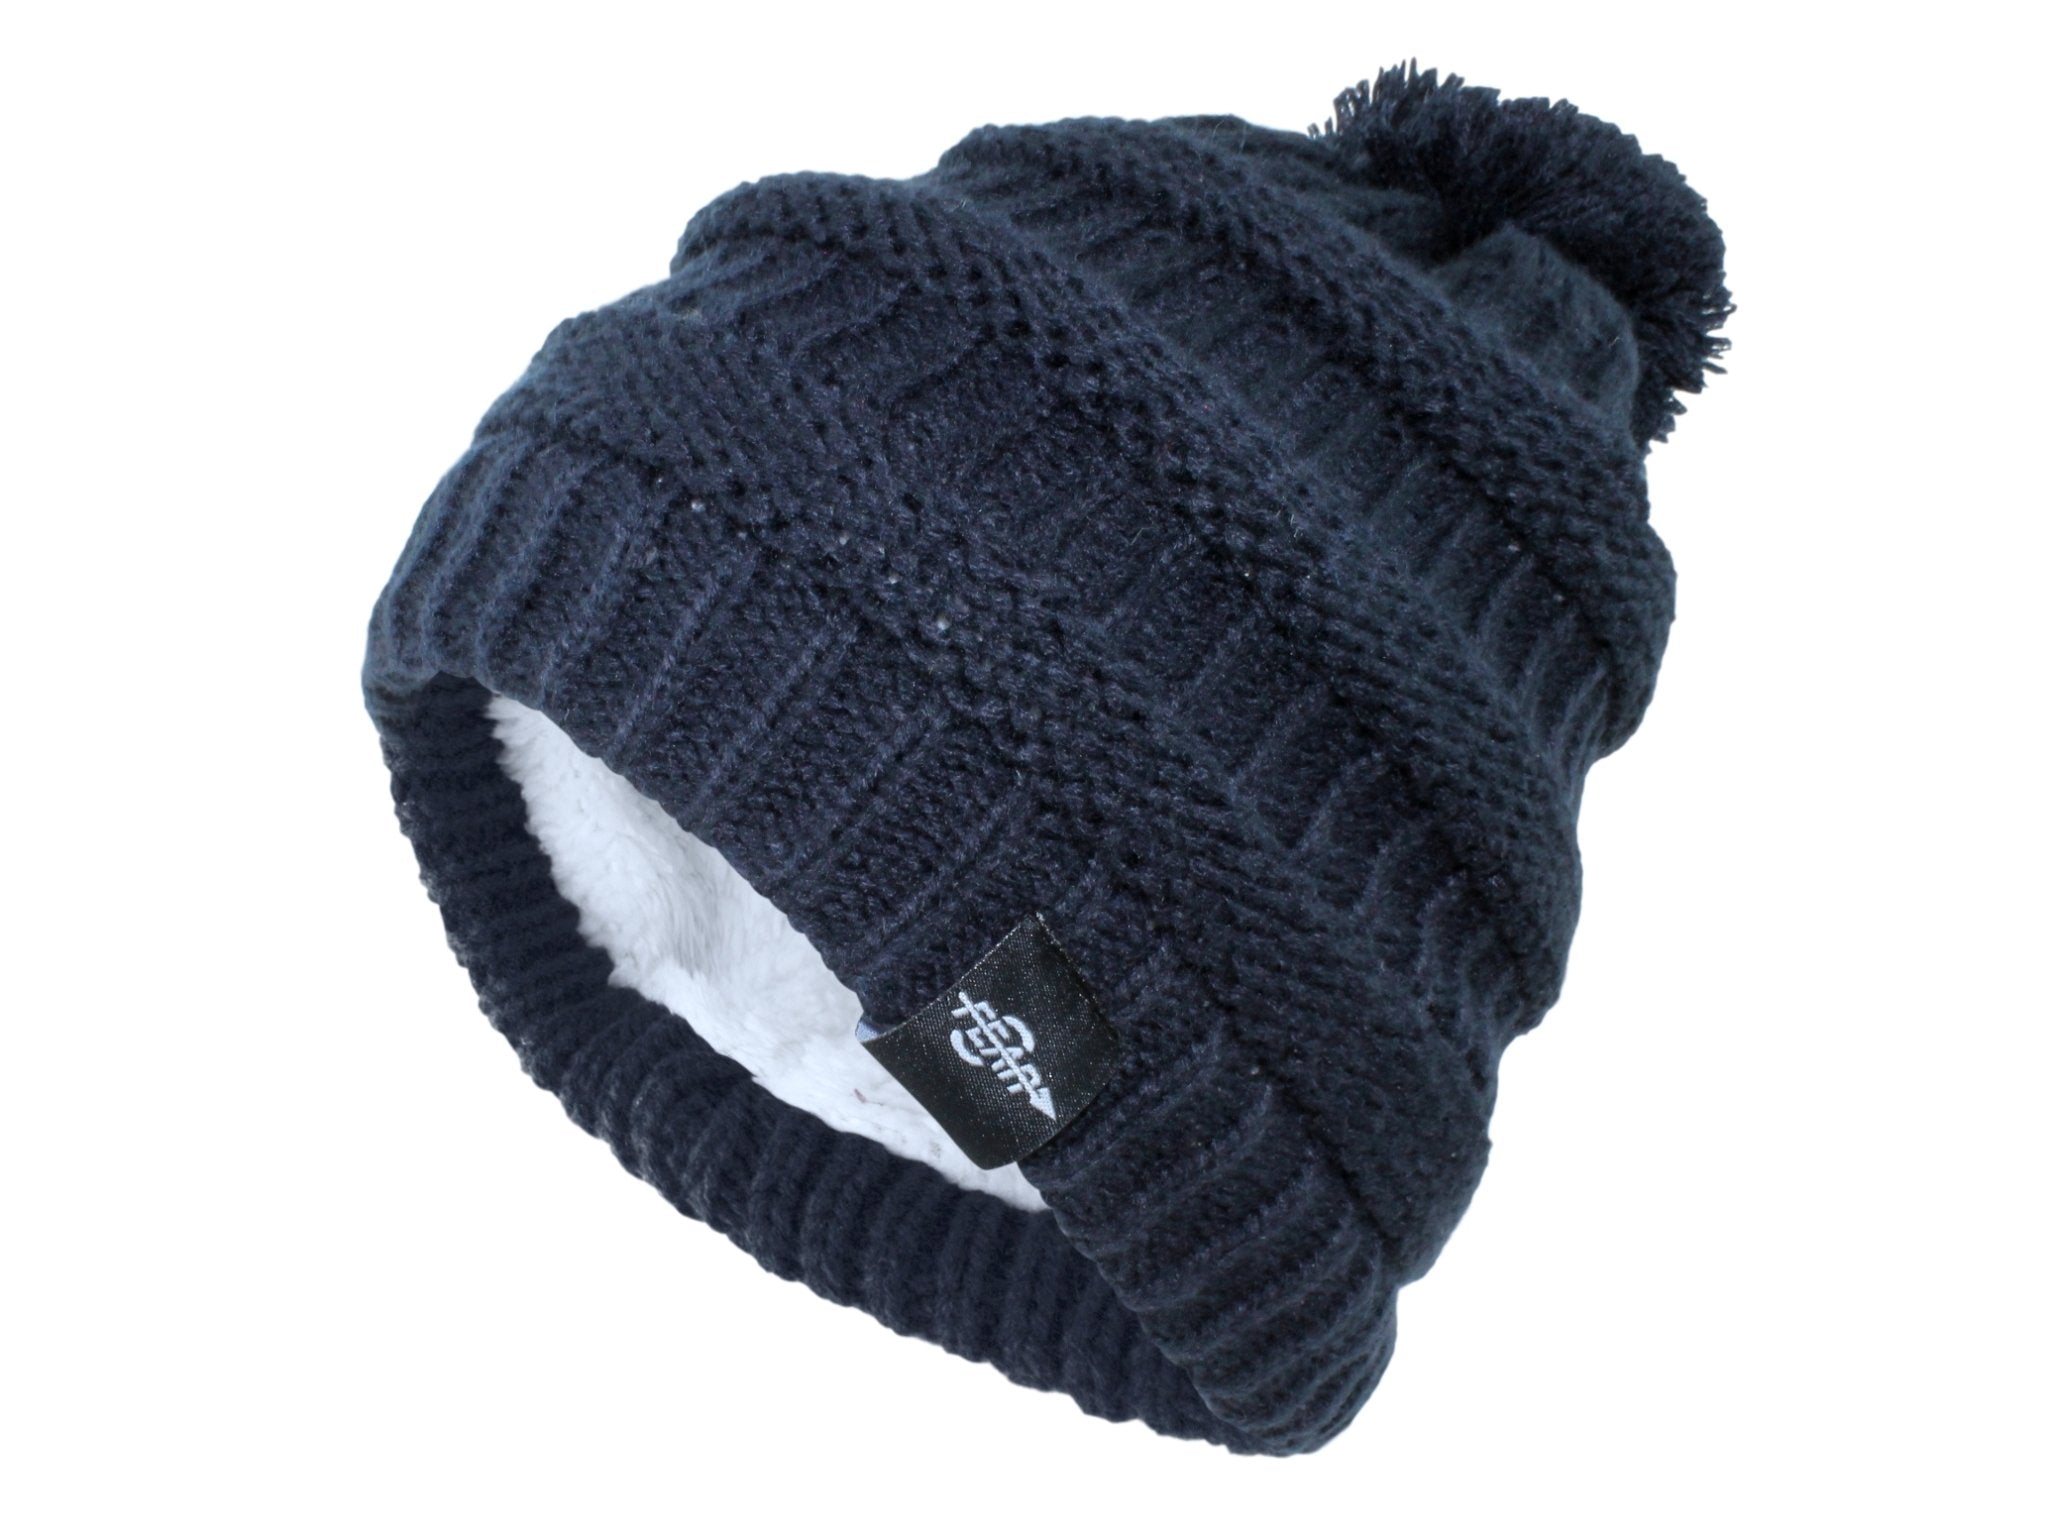 Fear0 Women's Plush Insulated Extreme Cold Knit Pom Beanie Hat - Benn Burry